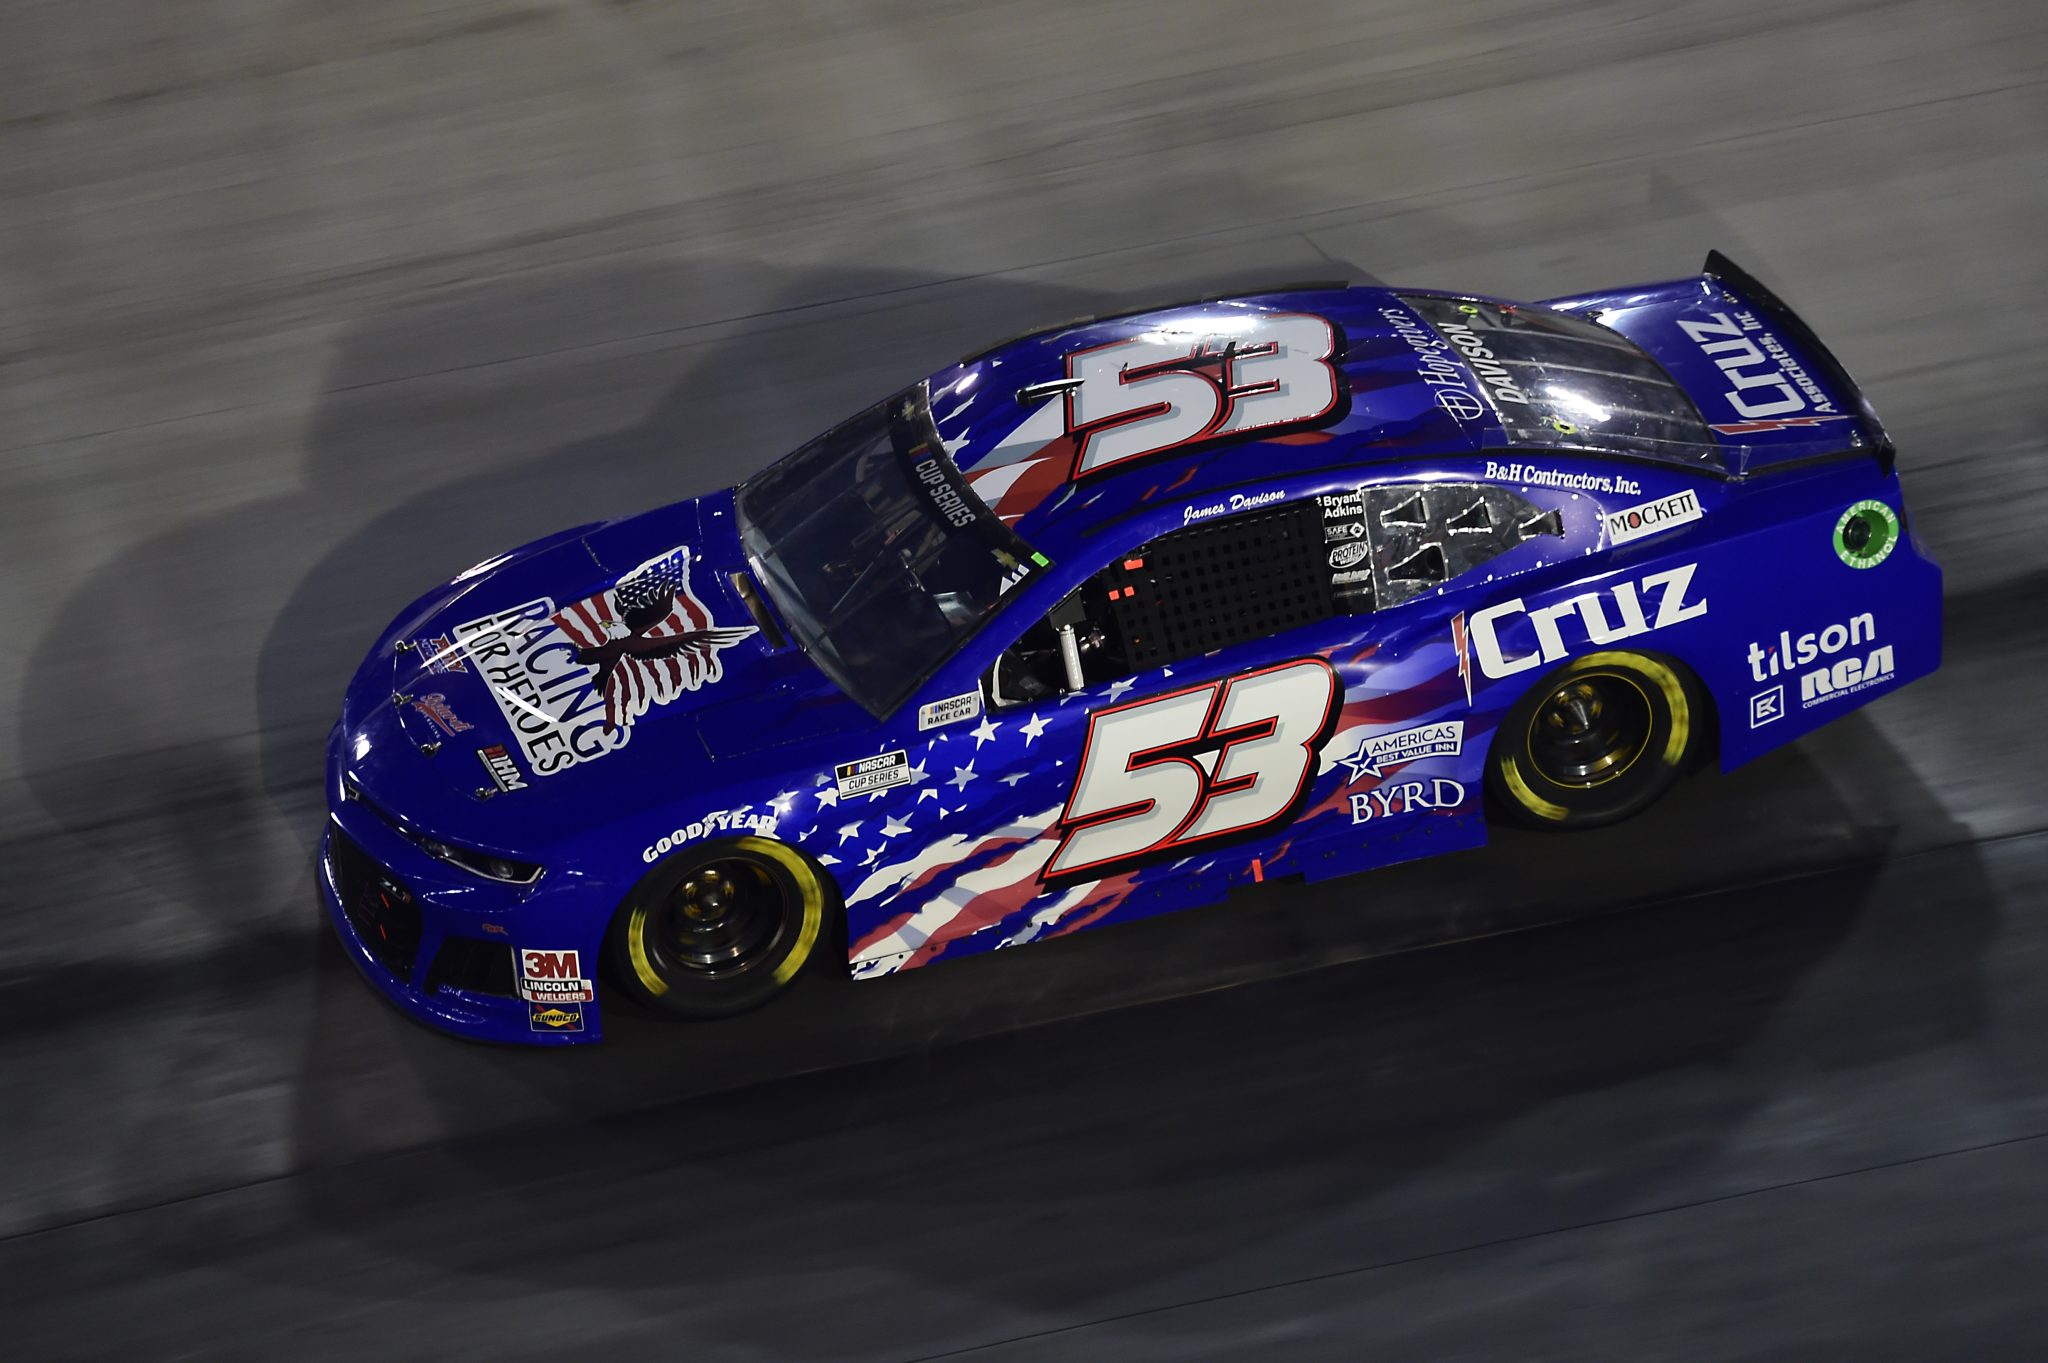 BRISTOL, TENNESSEE - SEPTEMBER 19: James Davison, driver of the #53 Racing for Heroes Ford, drives during the NASCAR Cup Series Bass Pro Shops Night Race at Bristol Motor Speedway on September 19, 2020 in Bristol, Tennessee. (Photo by Jared C. Tilton/Getty Images) | Getty Images